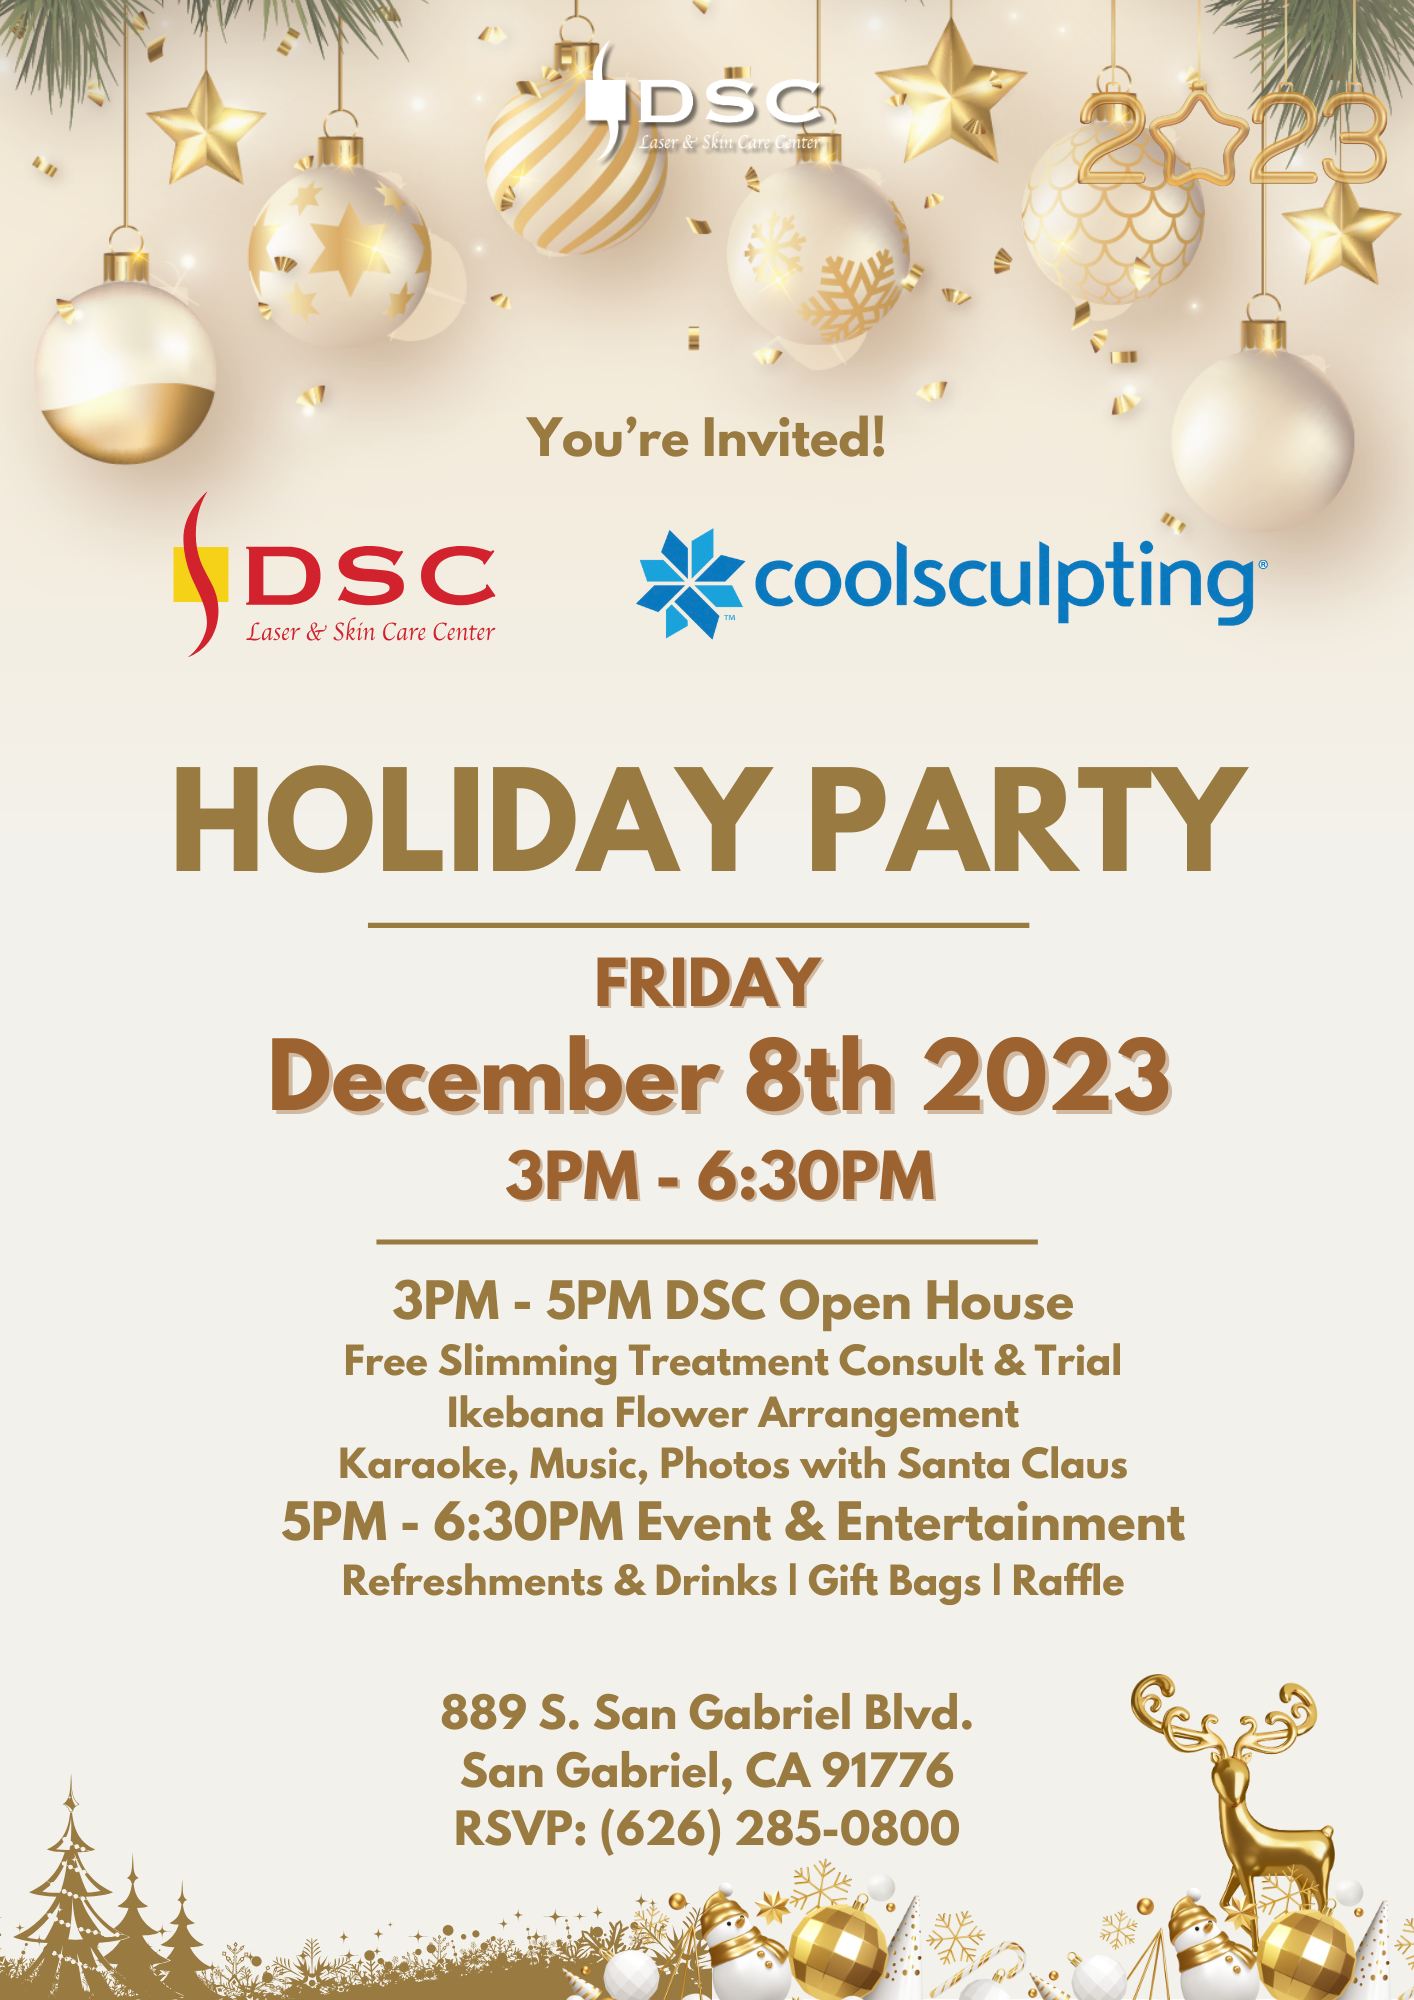 DSC Holiday Christmas Event 2023 December 1282023 Invitation Flyer with DSC logo and Coolsculpting logo, Friday December 8th, 2023 from 3PM - 6:30PM